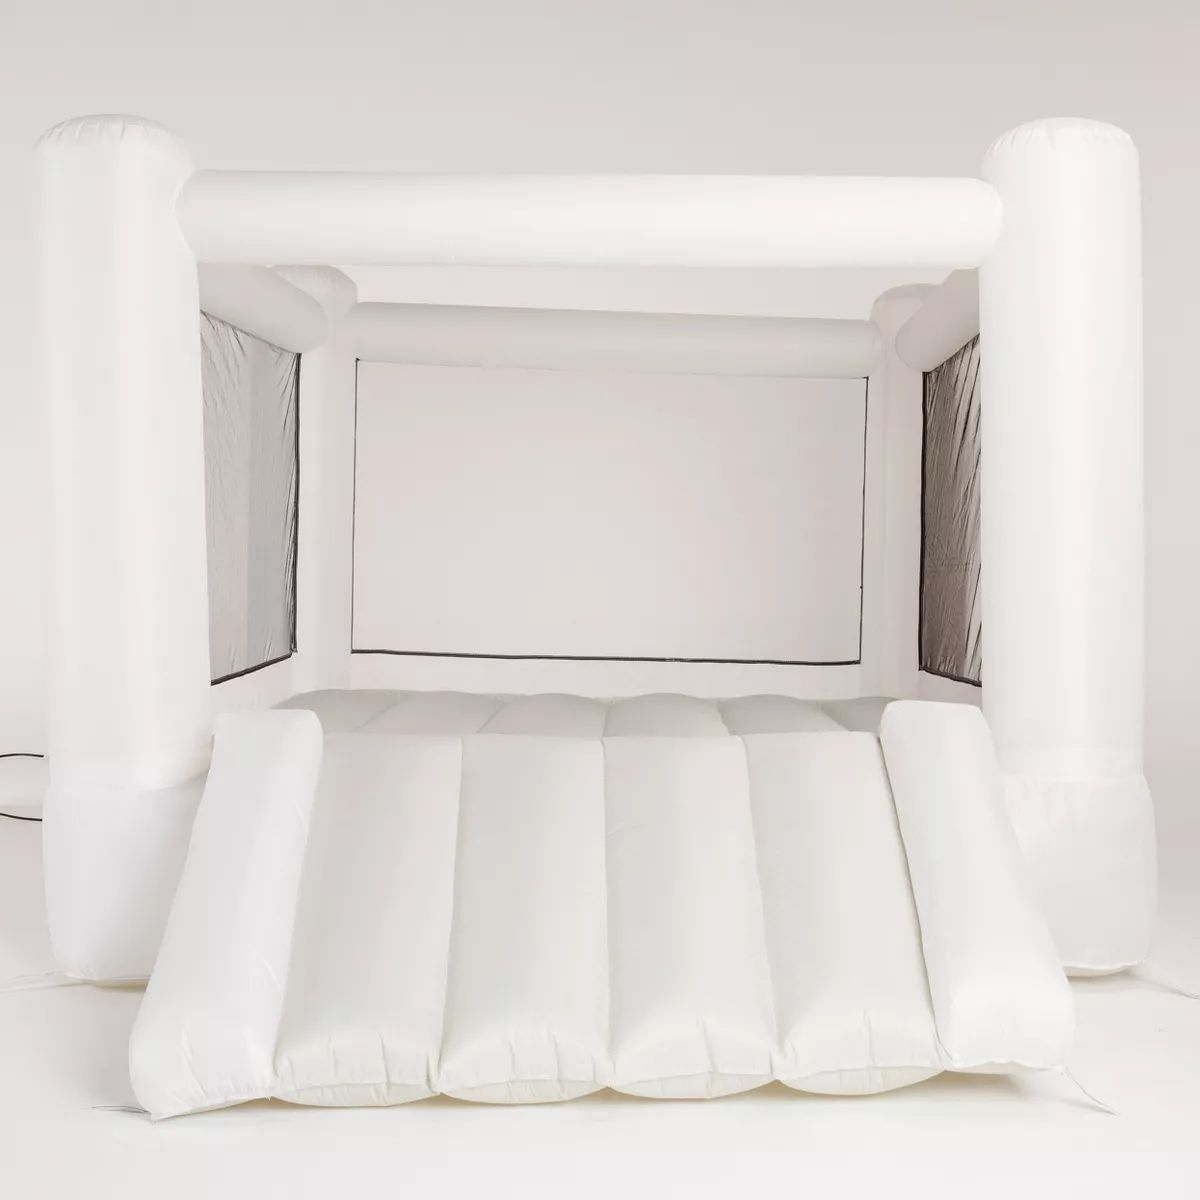 SMOL Inflatable 8' x 8' Tumble Bounce House - Neutral | Target